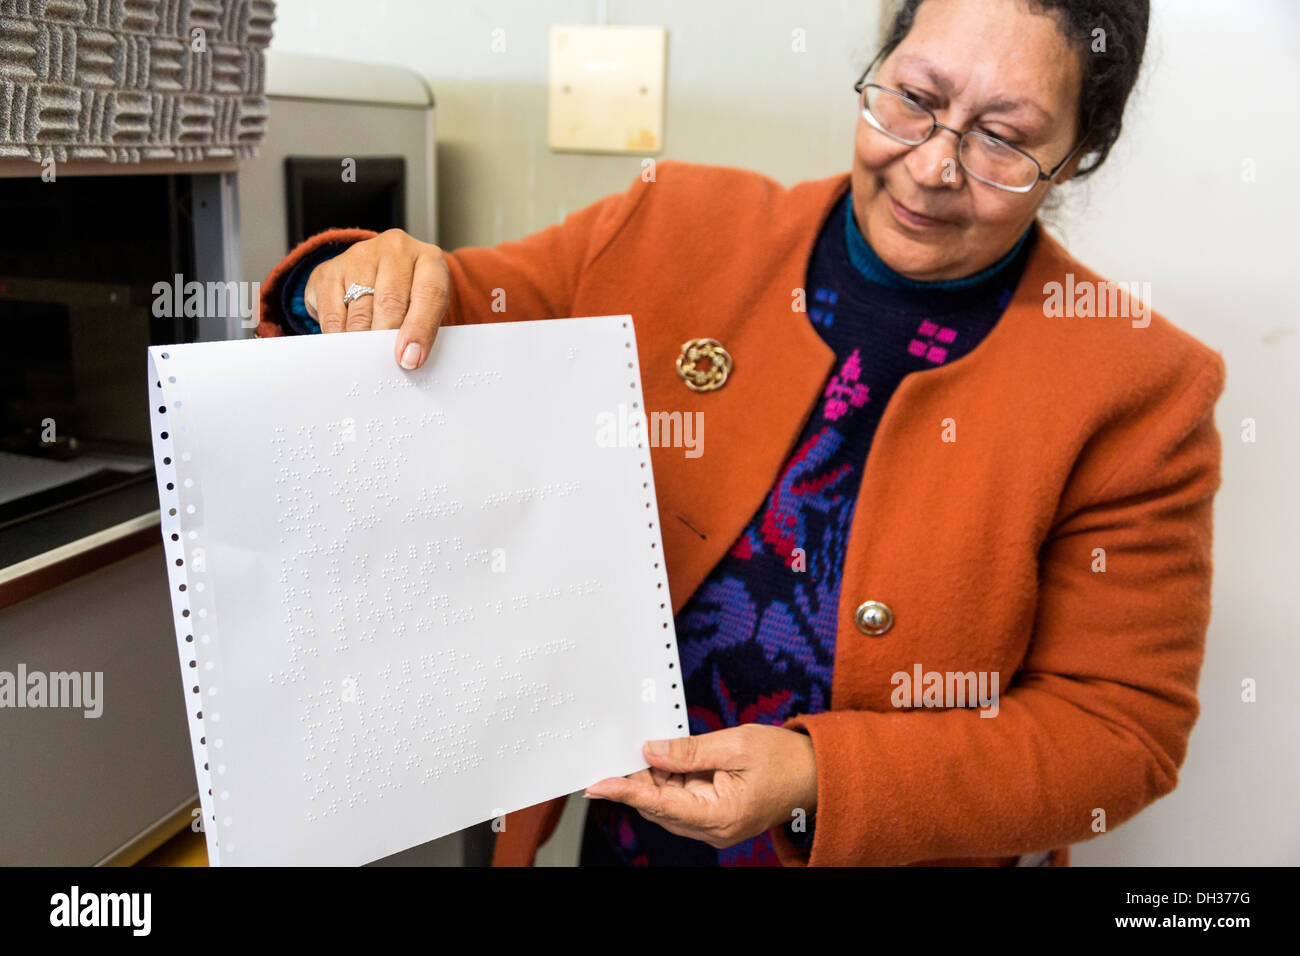 South Africa, Cape Town. Editor Showing a Page from a Braille Printer. Athlone School for the Blind. Stock Photo